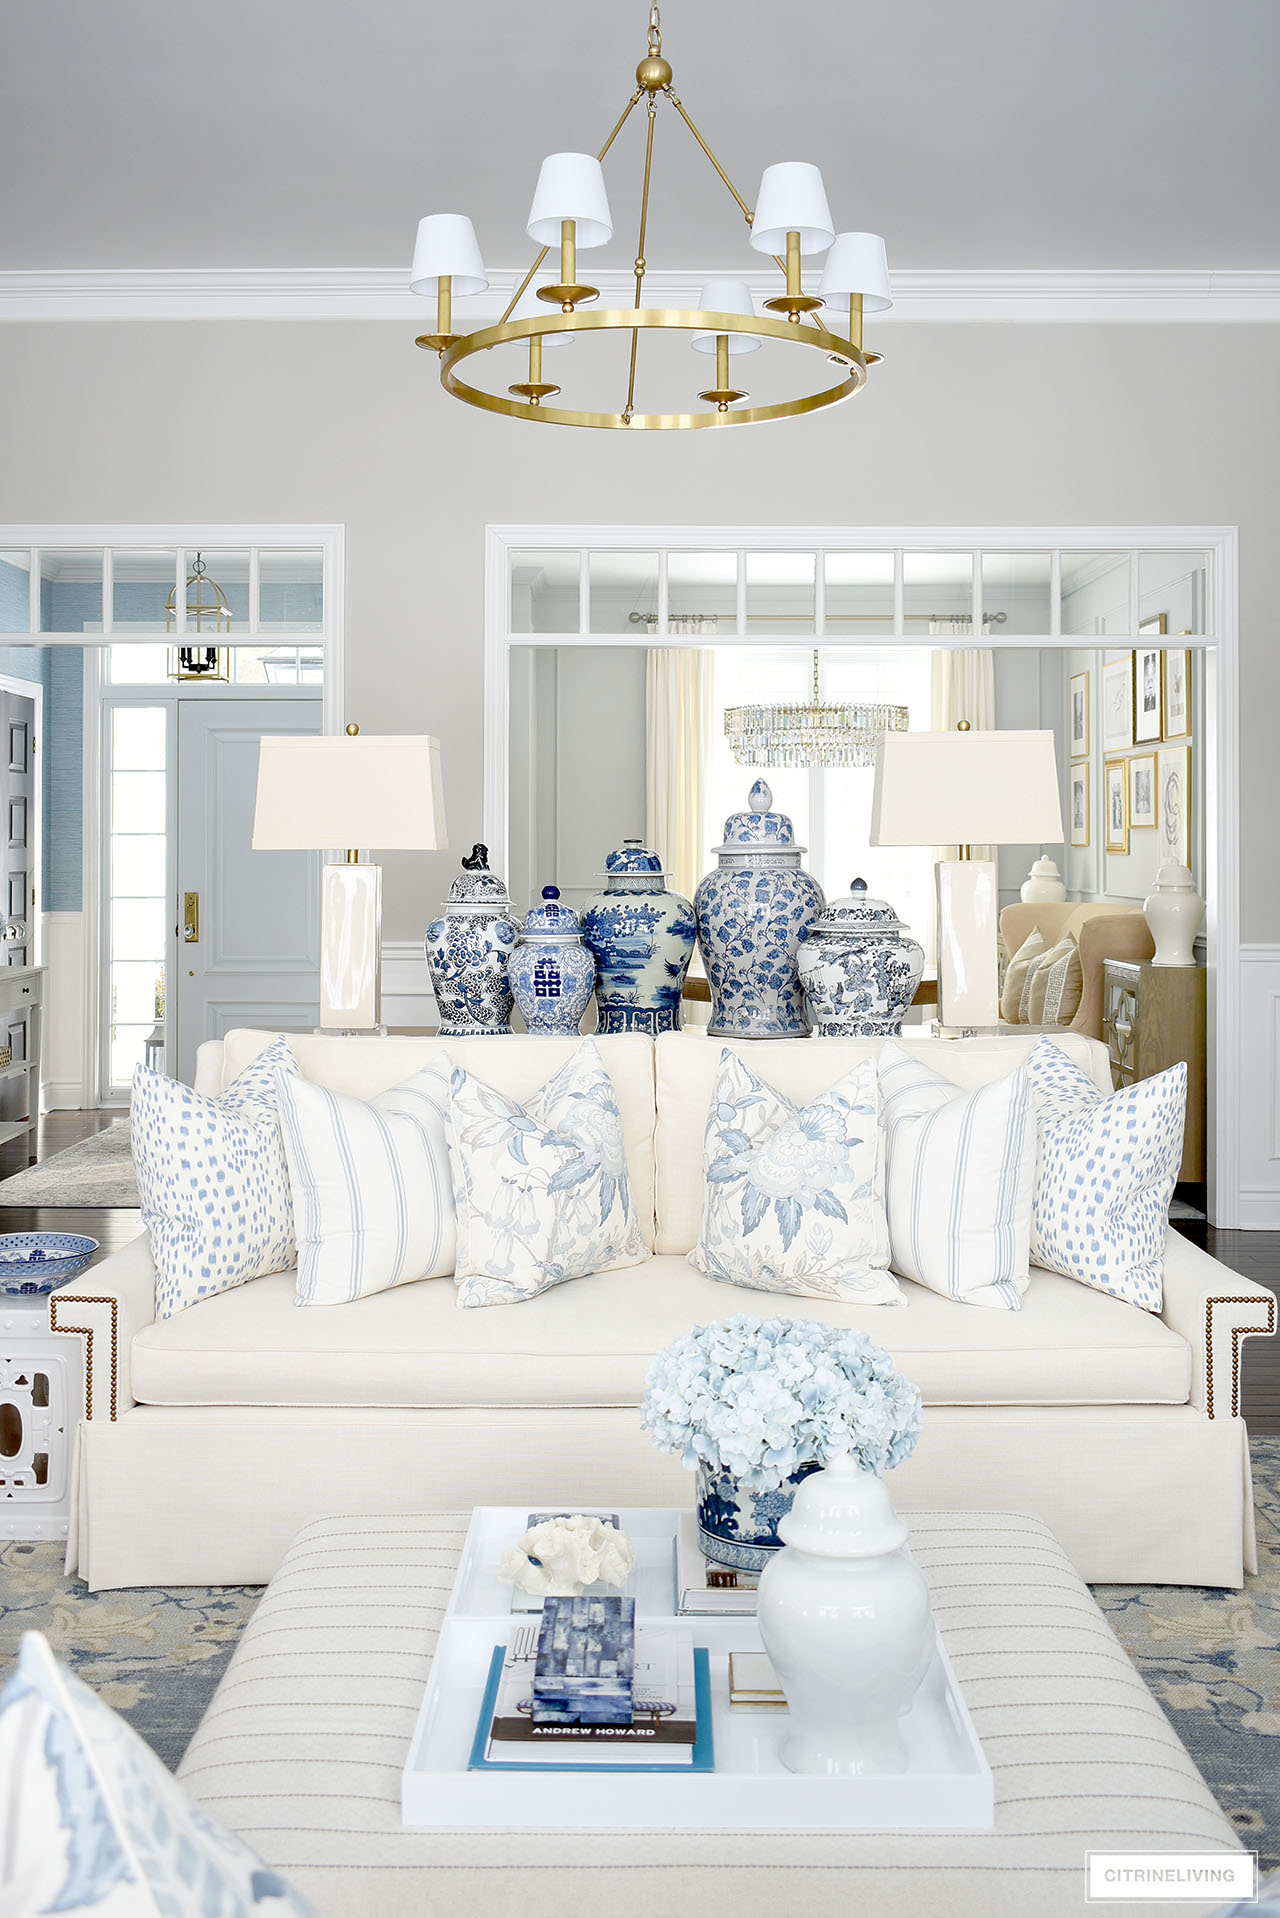 Living room decorated for spring with blue and white pillows, blue and white ginger jars and faux flowers.